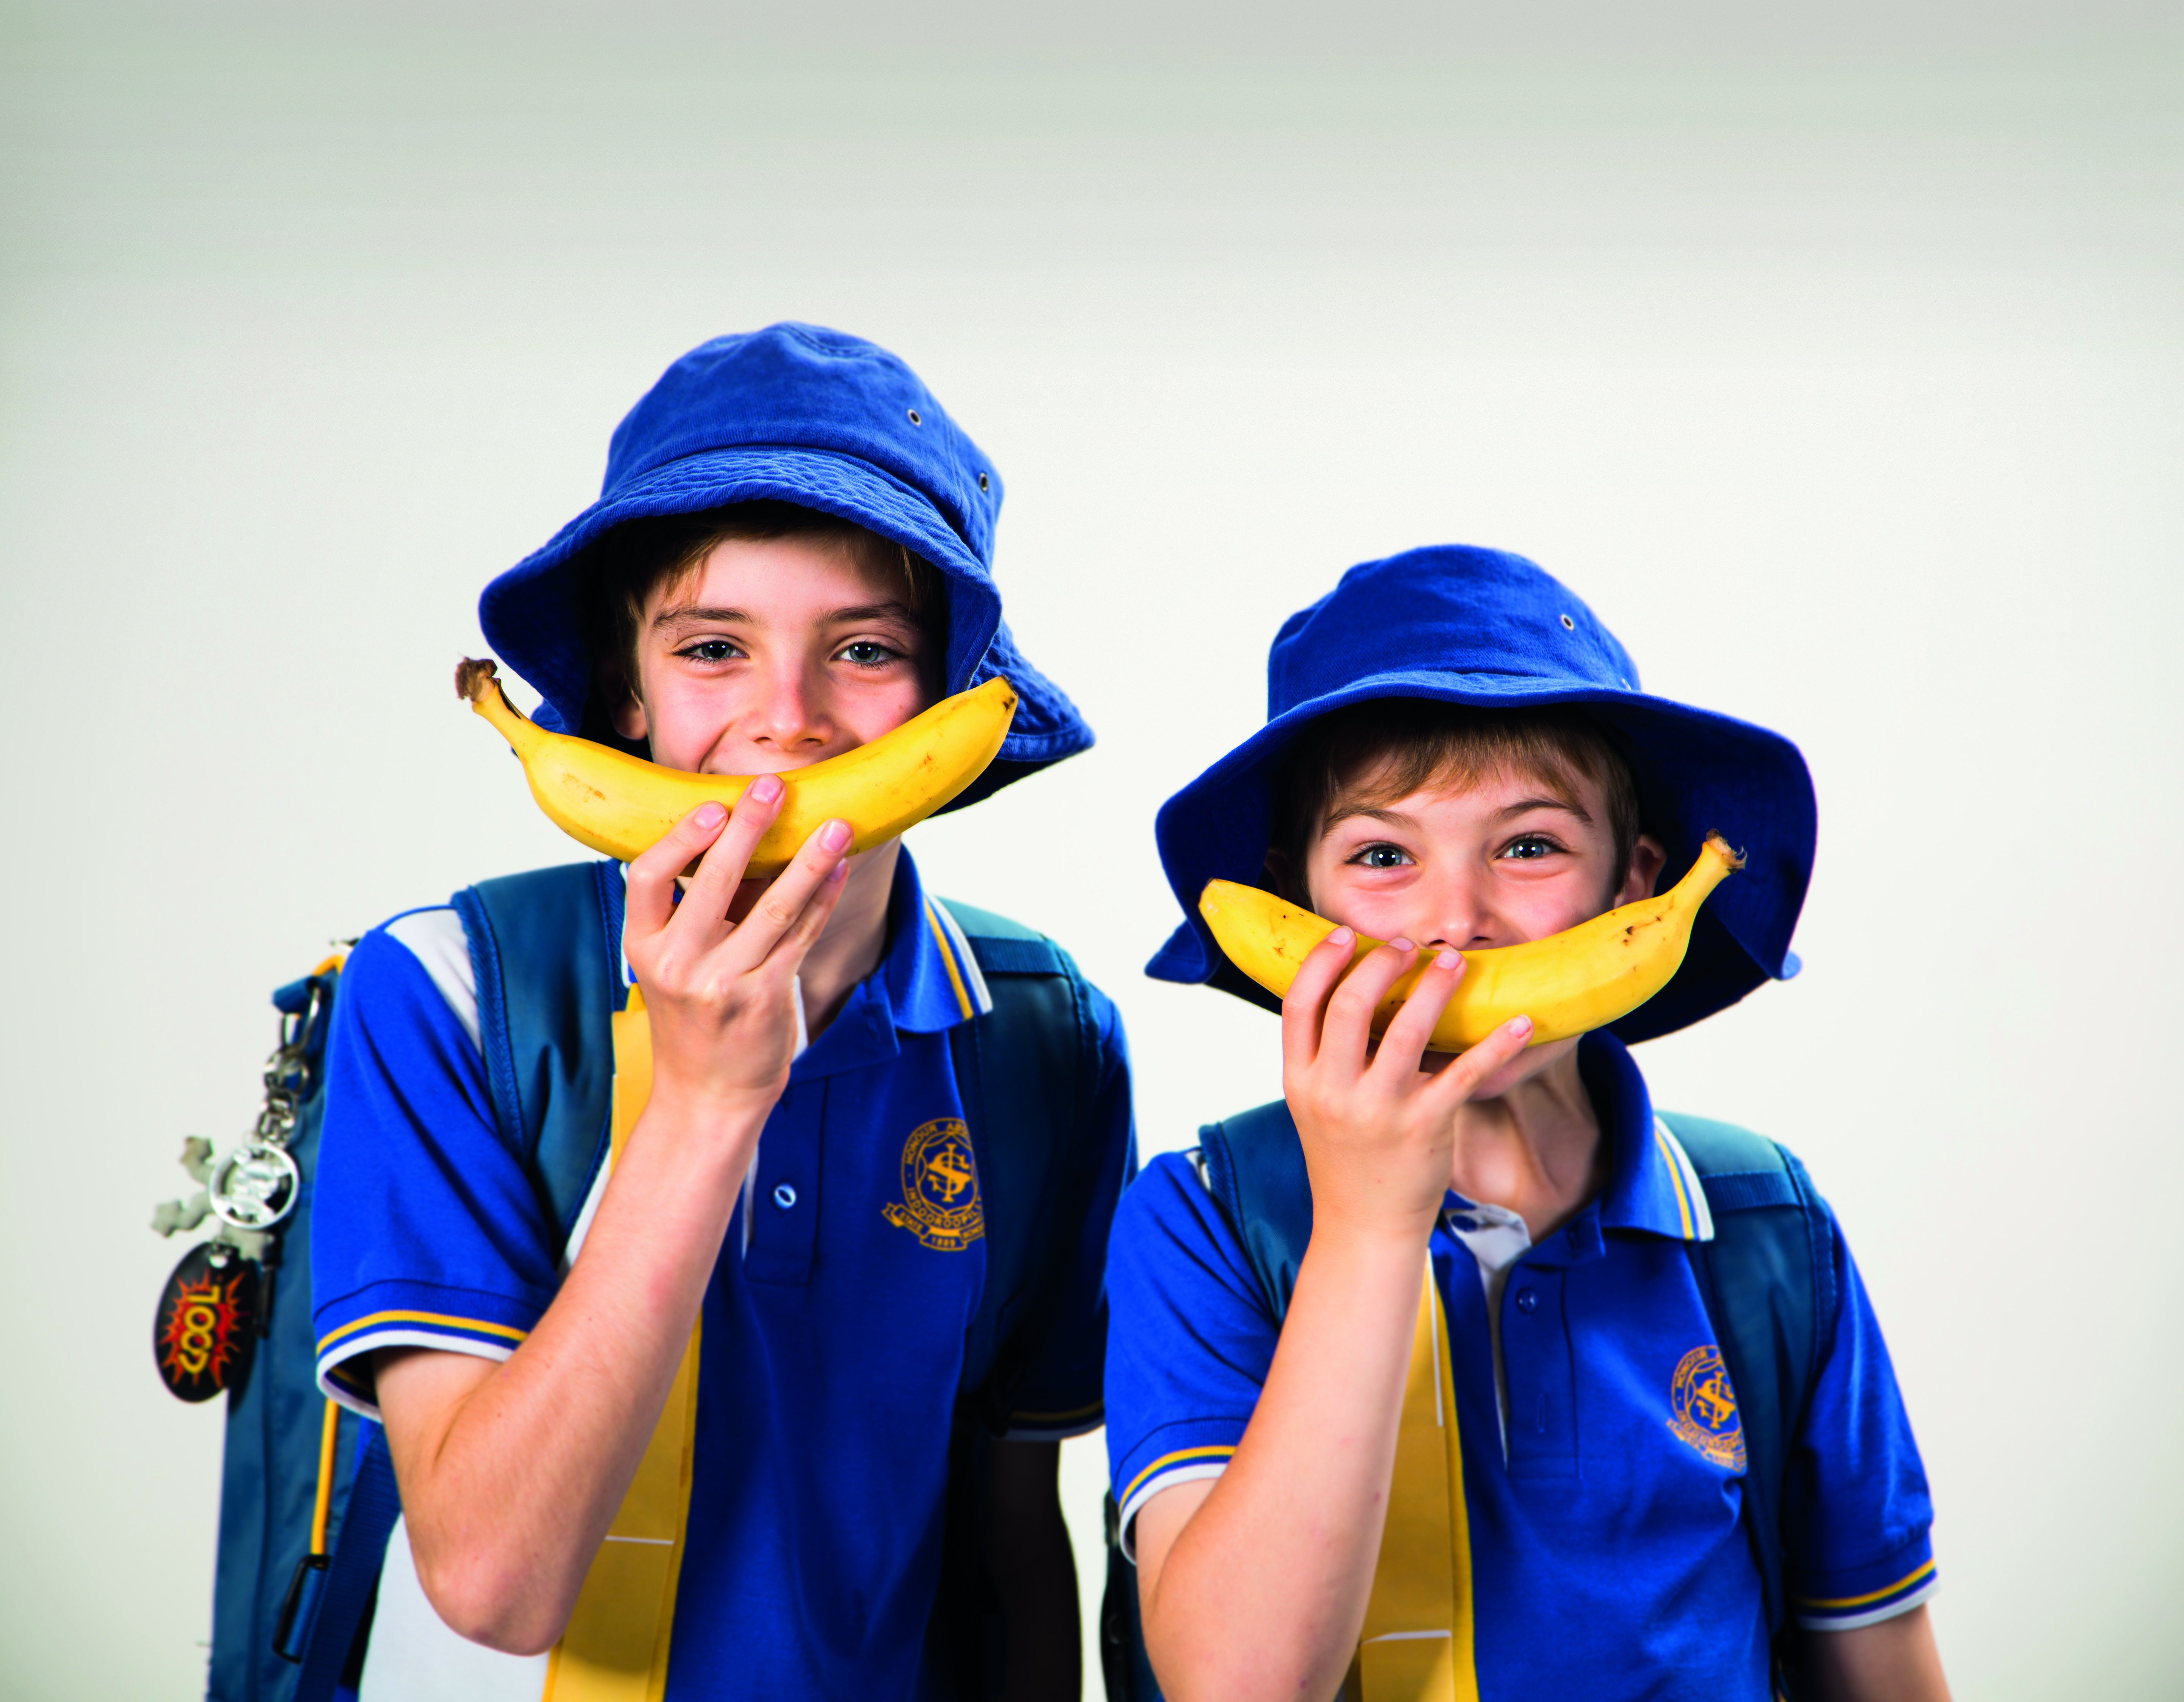 Kids going bananas! Photo courtesy of Cancer Council Queensland